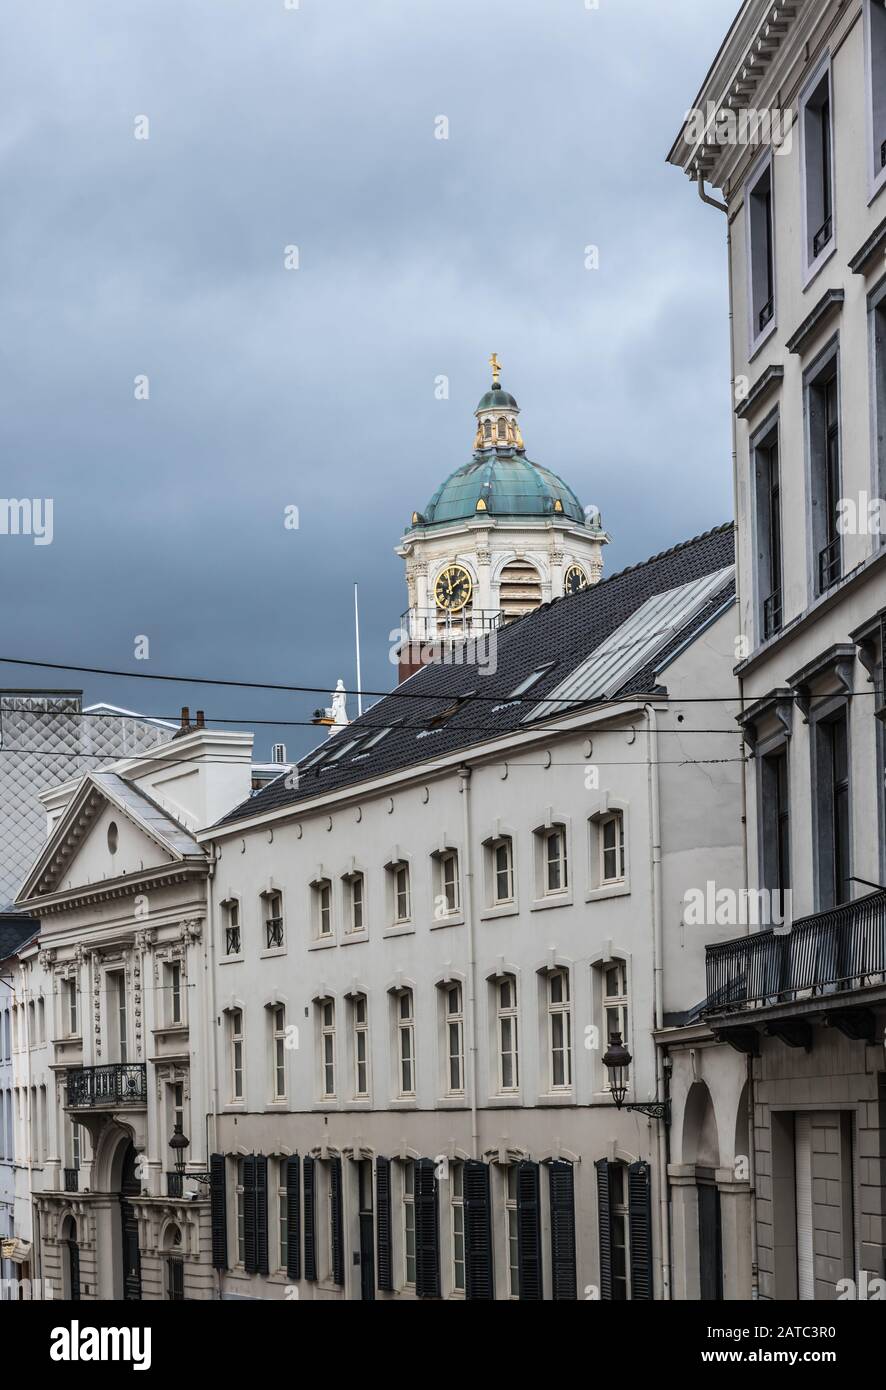 Brussels Old Town, Brussels Capital Region / Belgium - 12 20 2019: View over the Rue de Namur Naamse straat and the Coudenberg tower Stock Photo